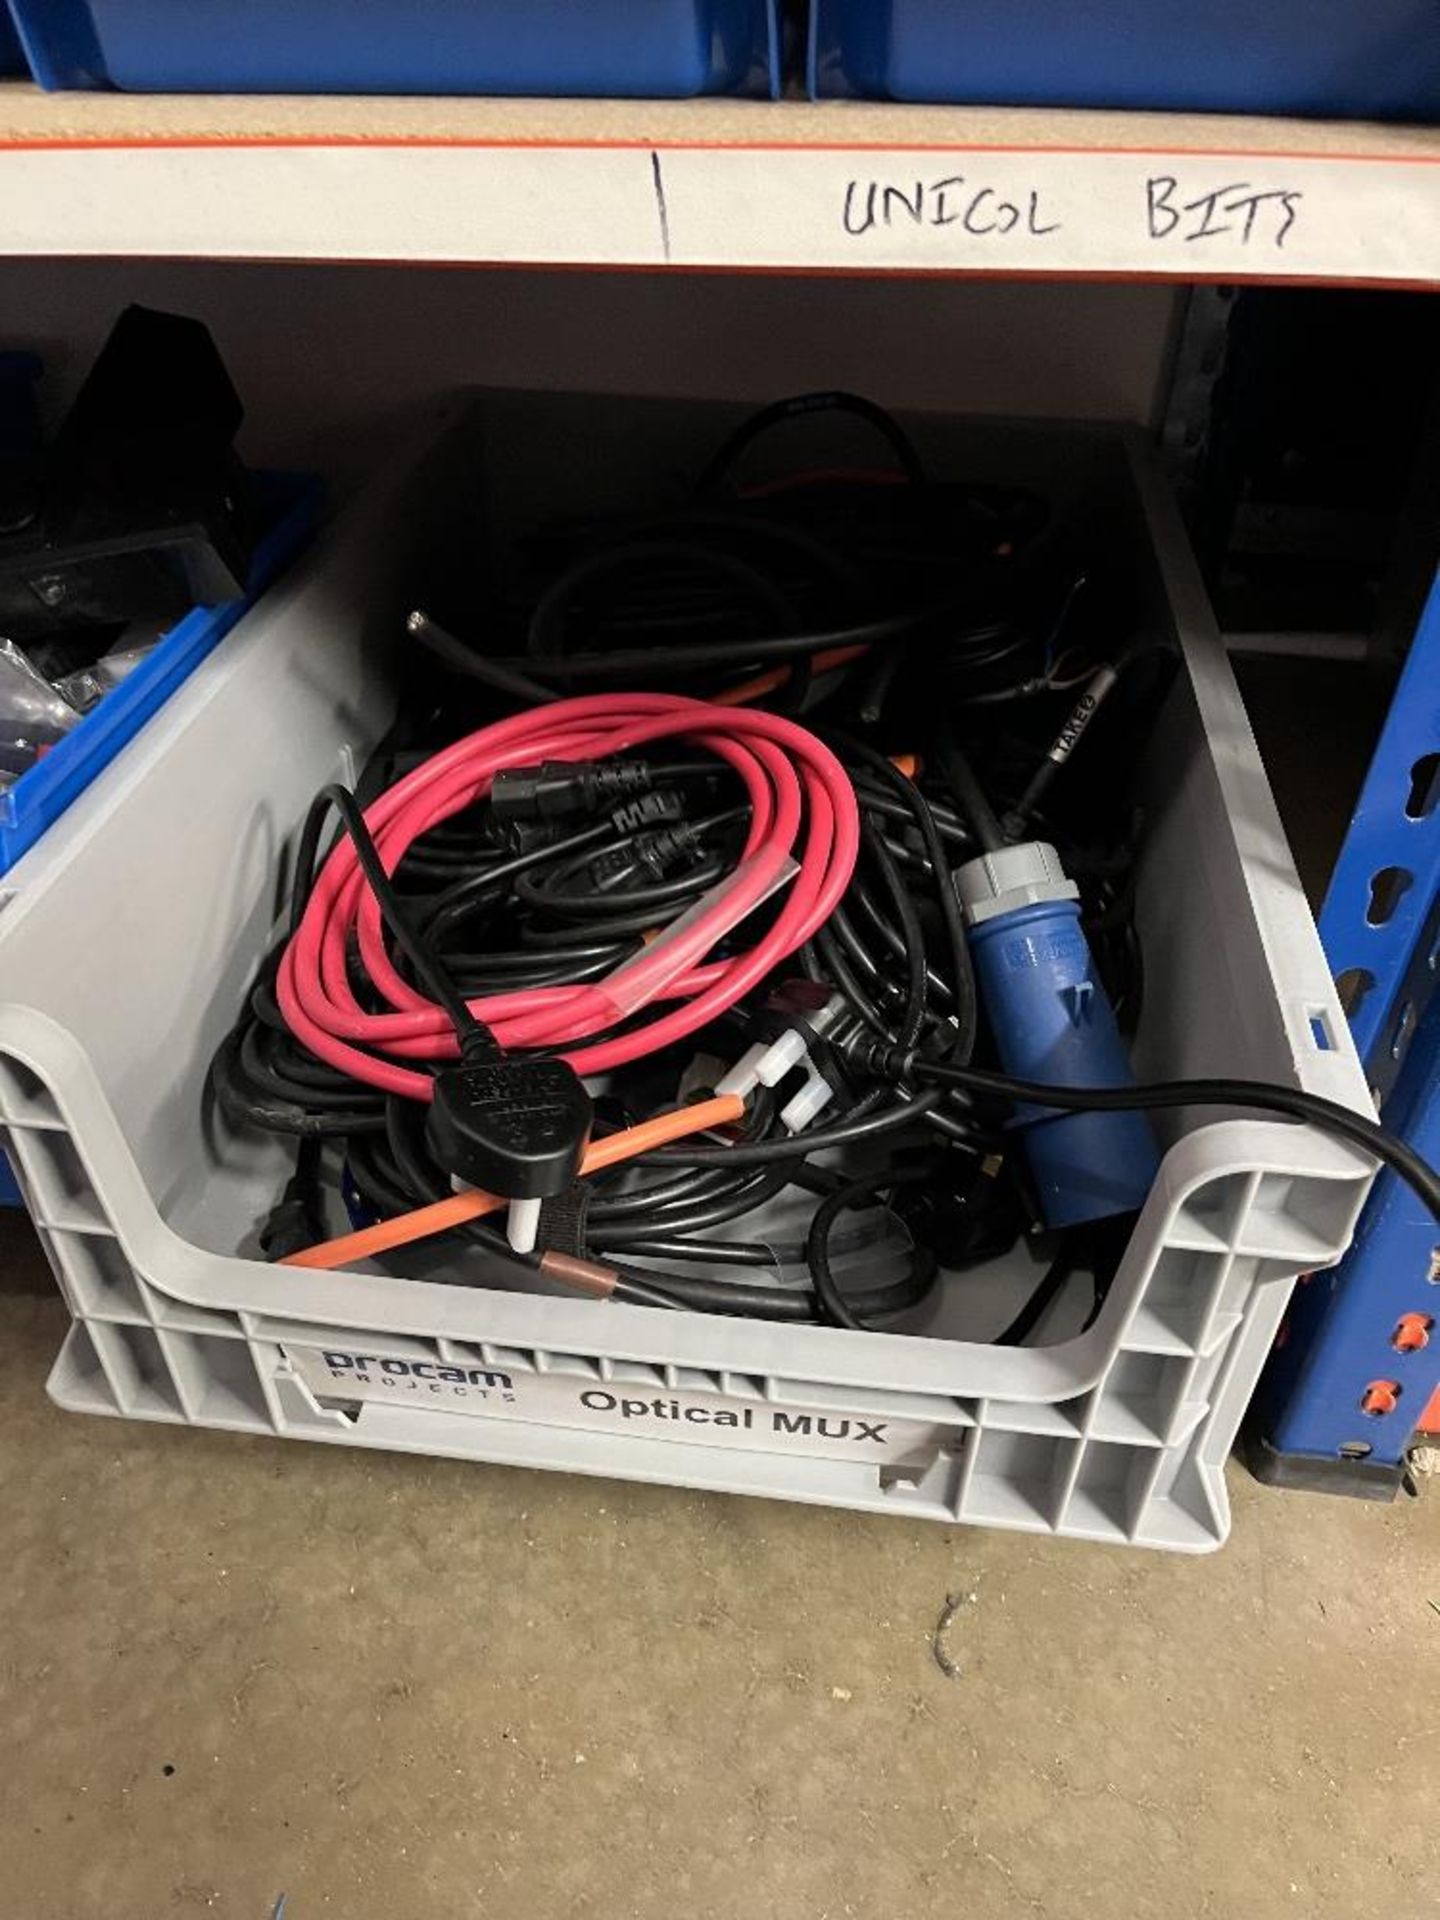 Contents of Racking to Include Switches, Controllers, Cable & Various Components - Image 22 of 27